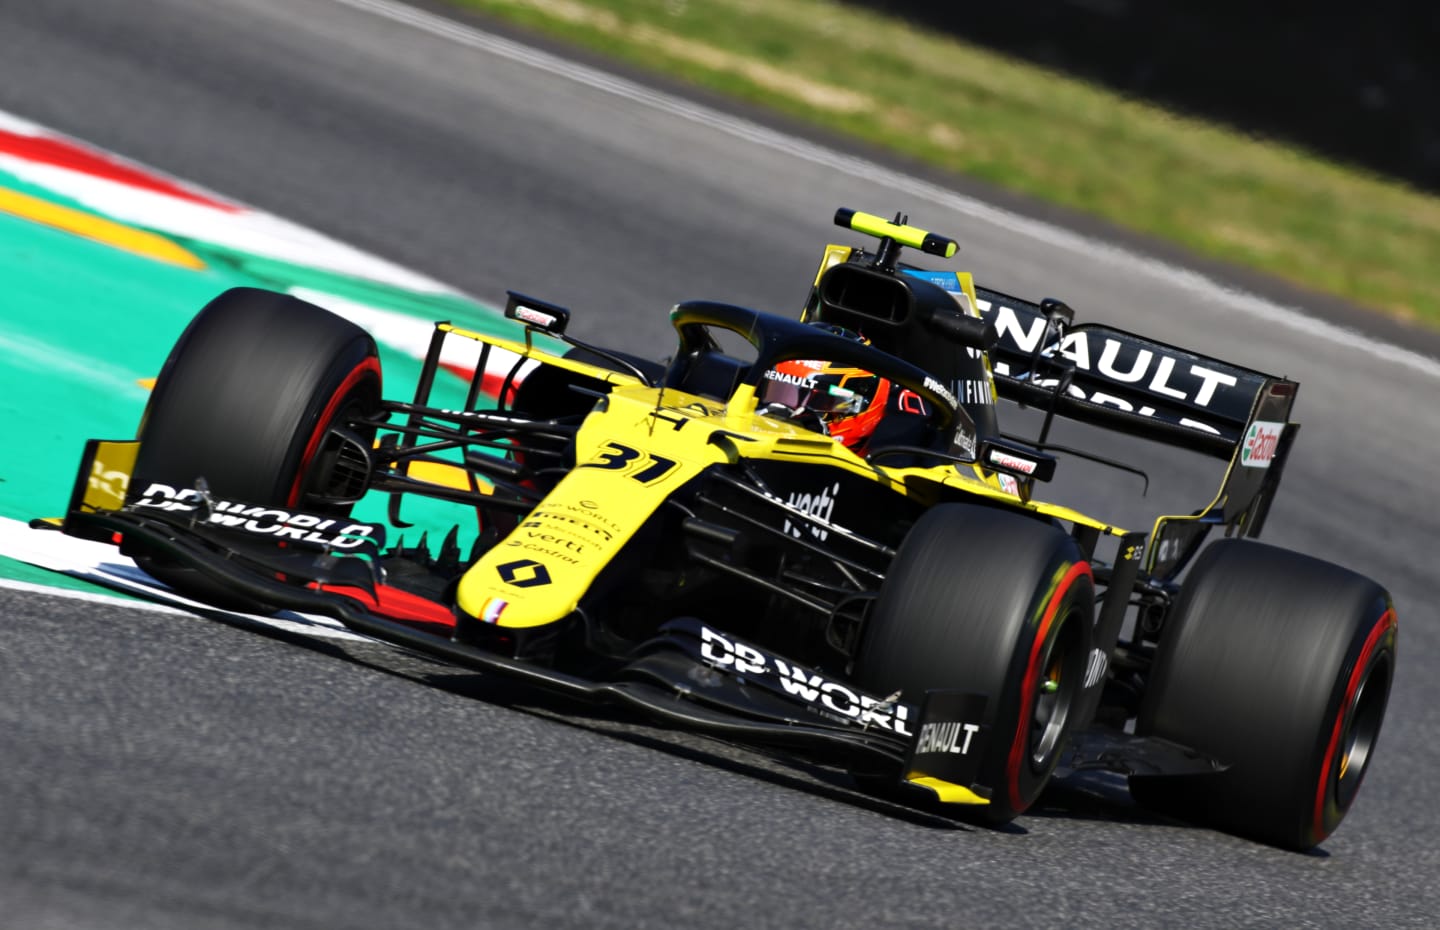 SCARPERIA, ITALY - SEPTEMBER 11: Esteban Ocon of France driving the (31) Renault Sport Formula One Team RS20 on track during practice ahead of the F1 Grand Prix of Tuscany at Mugello Circuit on September 11, 2020 in Scarperia, Italy. (Photo by Mark Thompson/Getty Images)